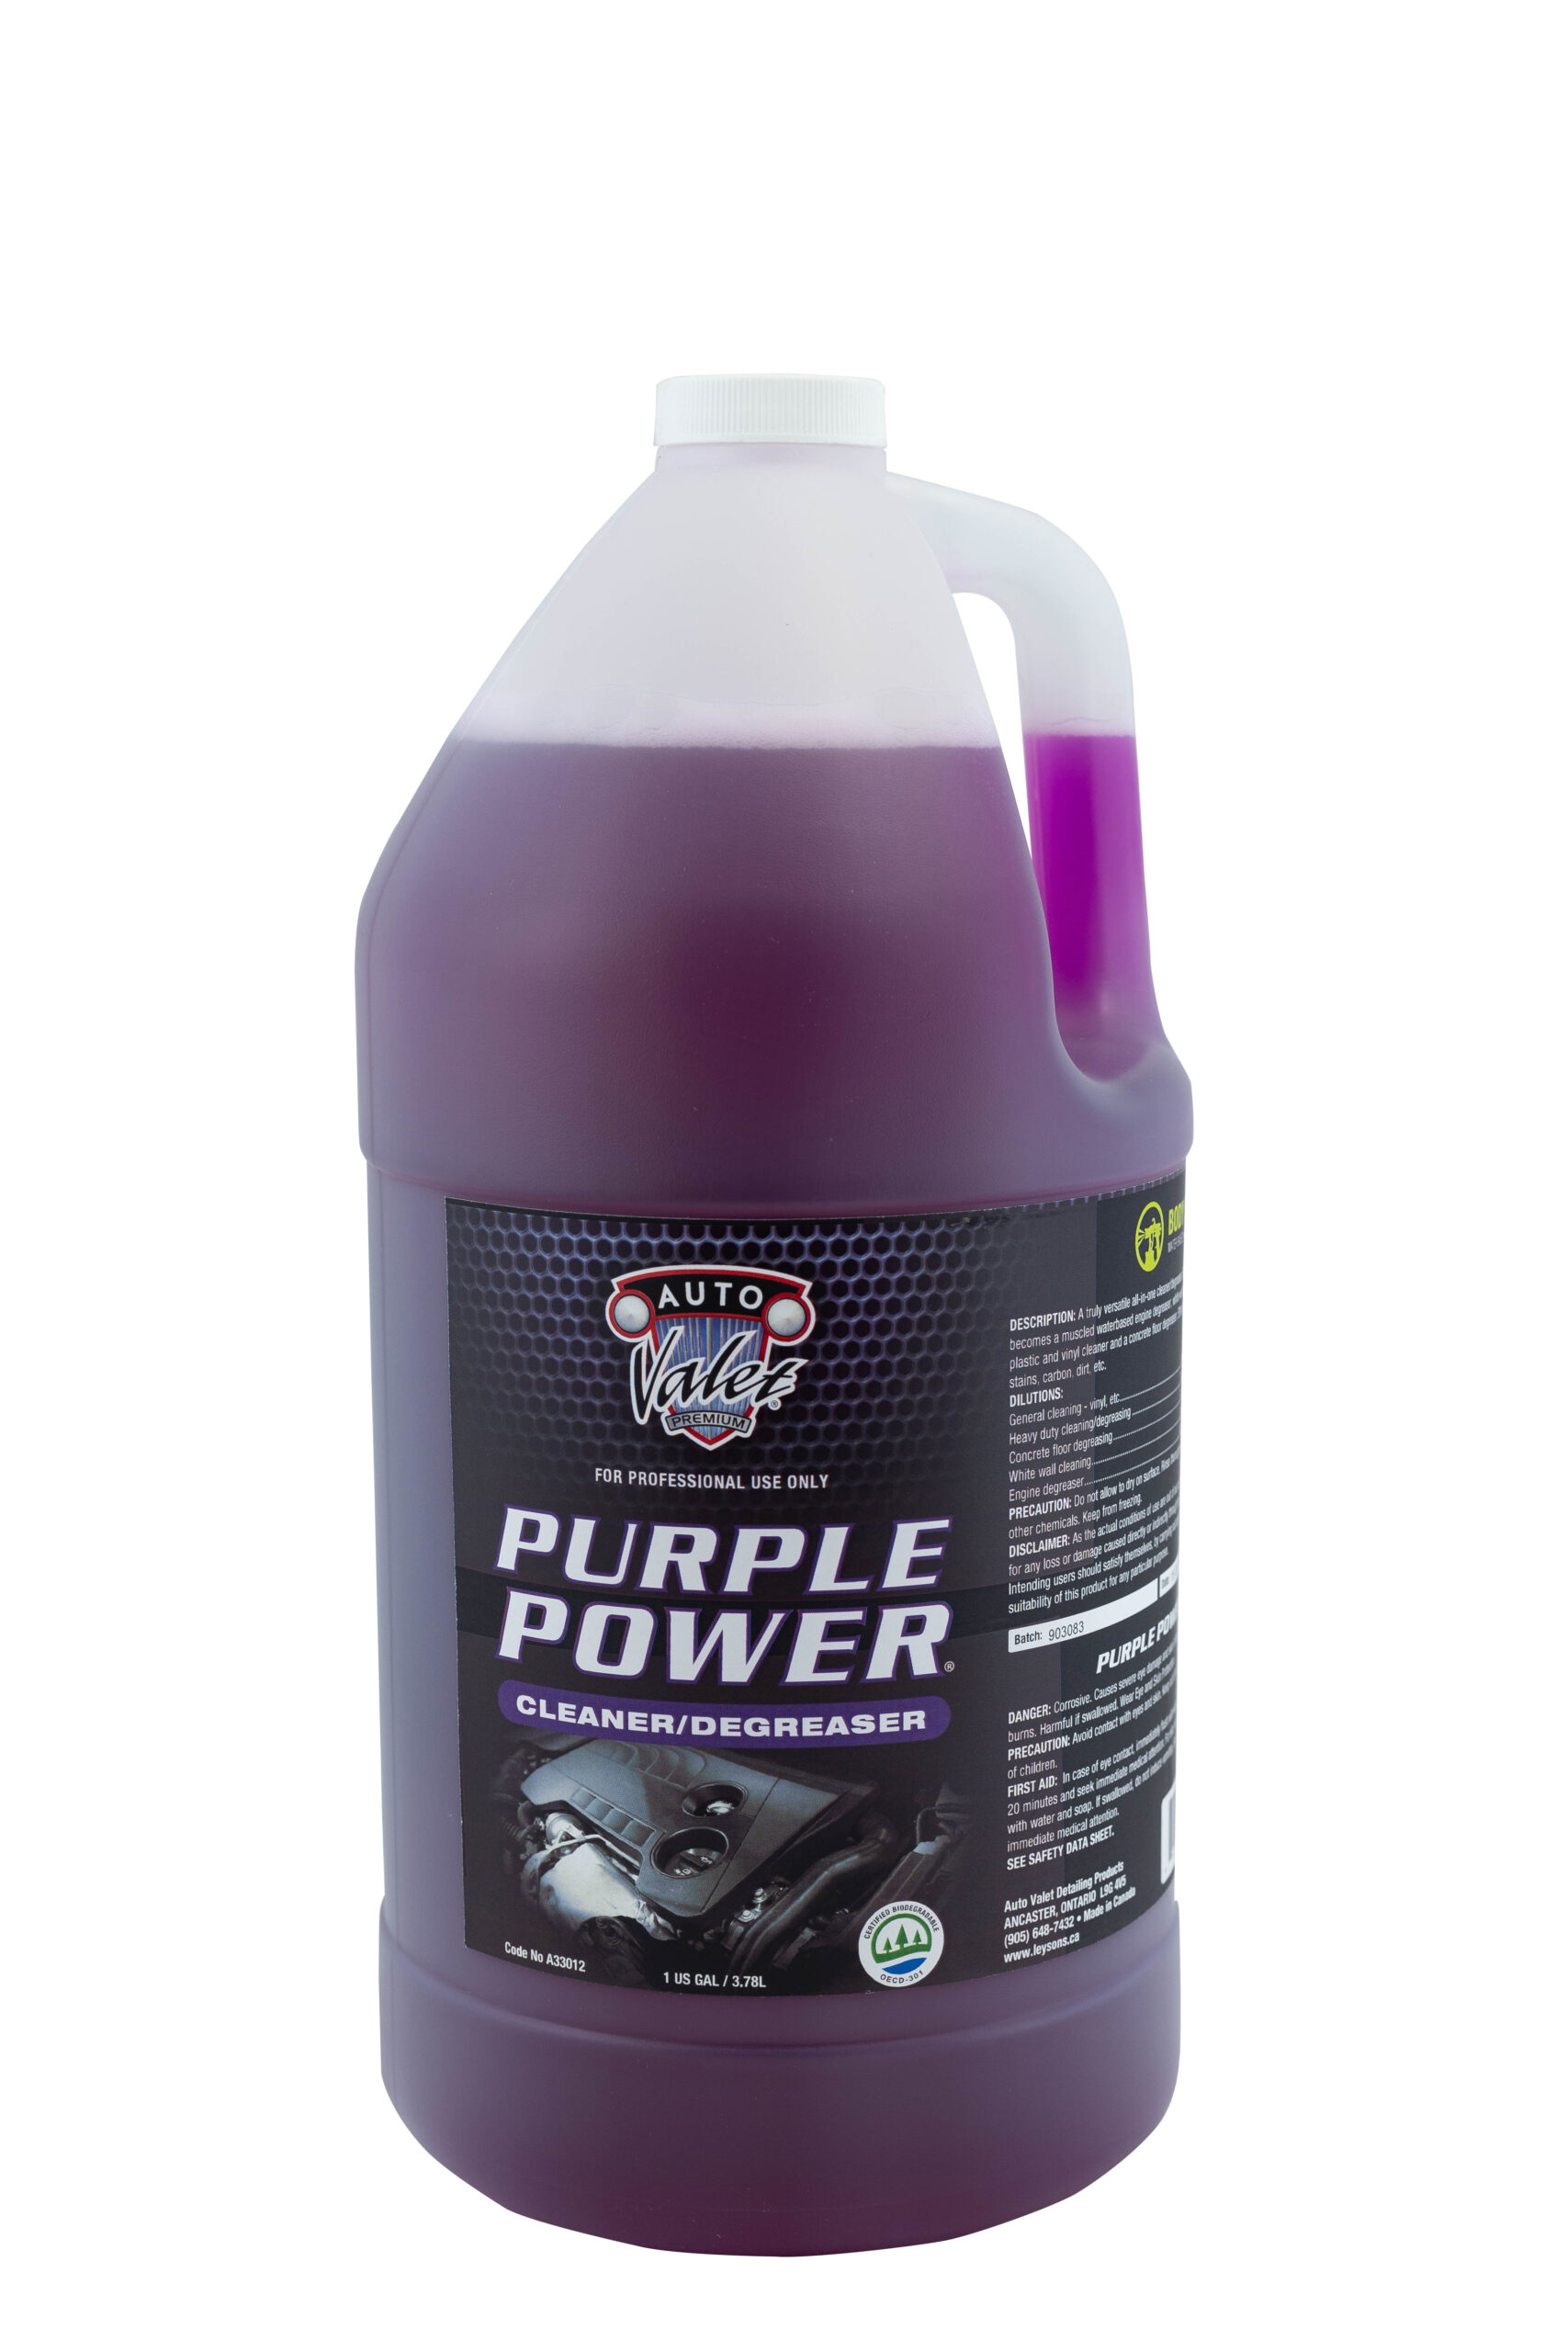 Purple Power Extreme Power Cleaner & Degreaser - 1 Gal